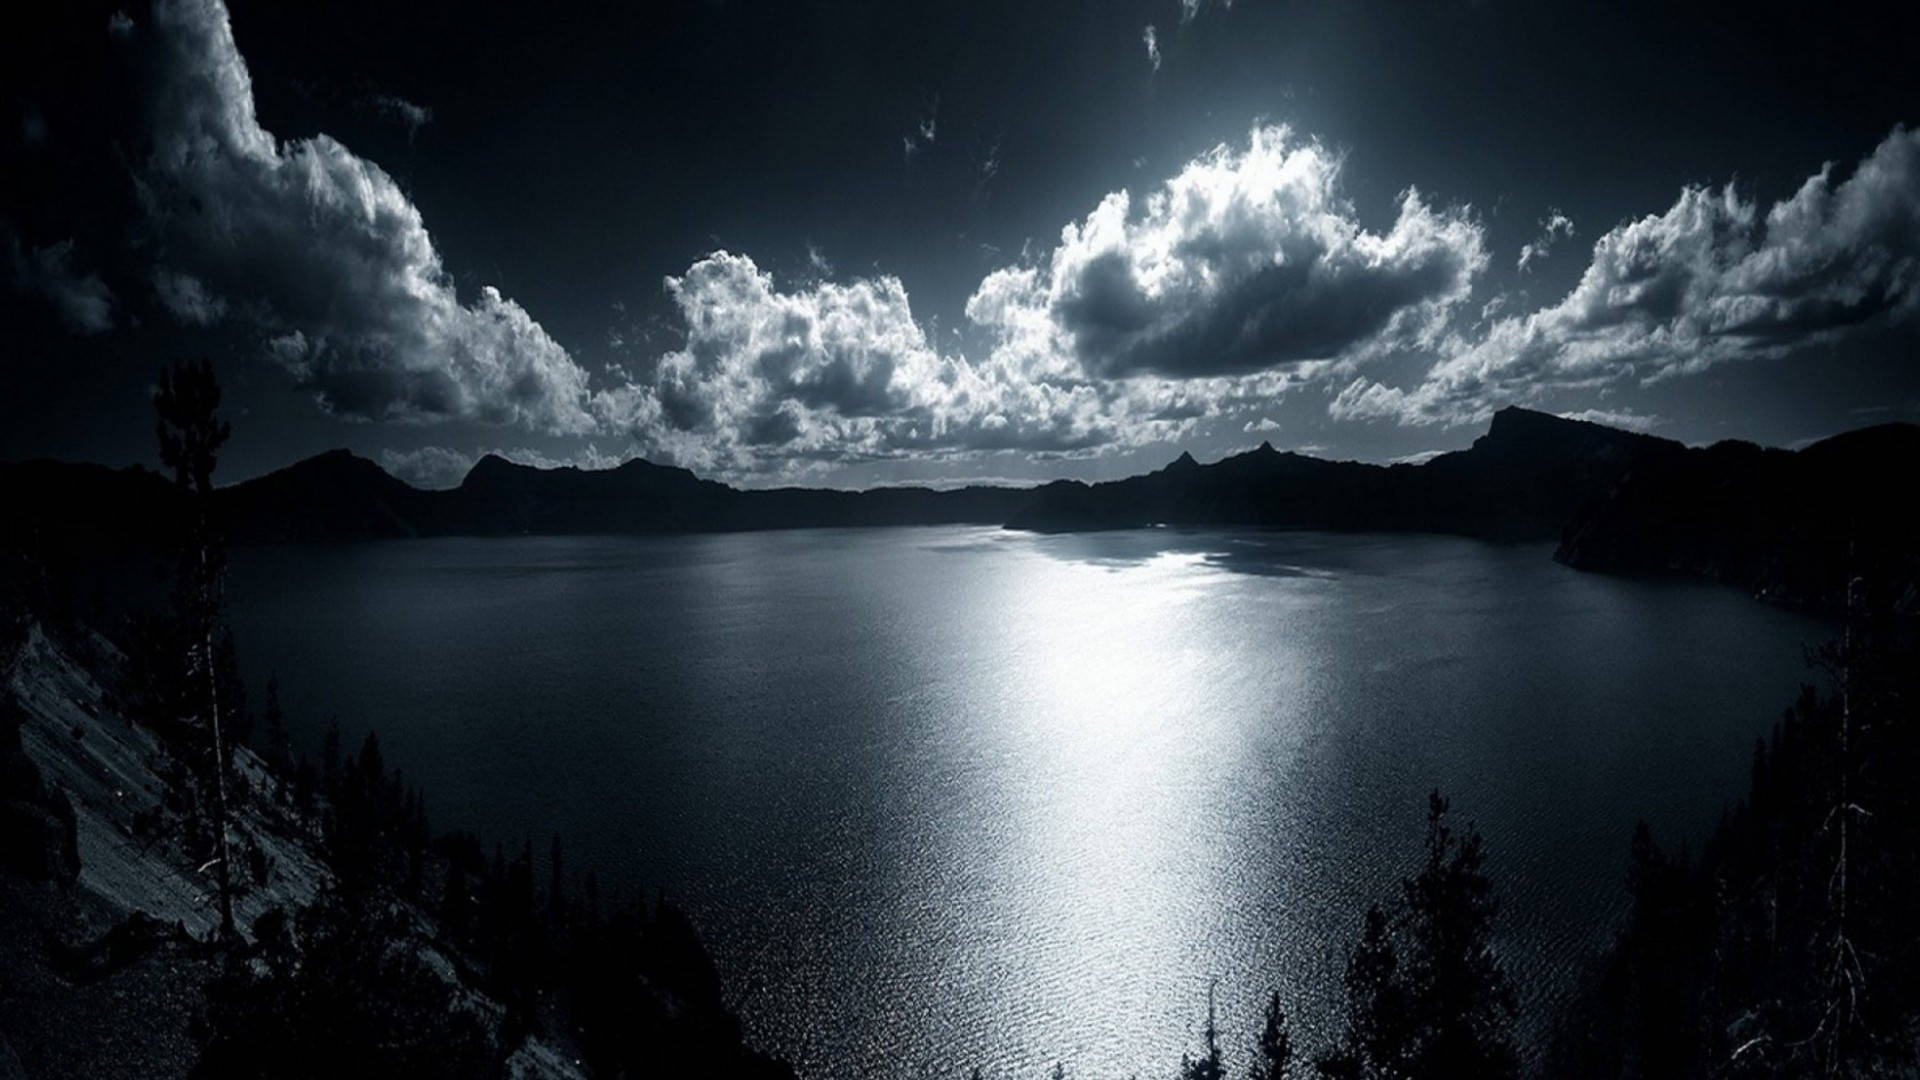 Moonlight Over A Mountain And Water